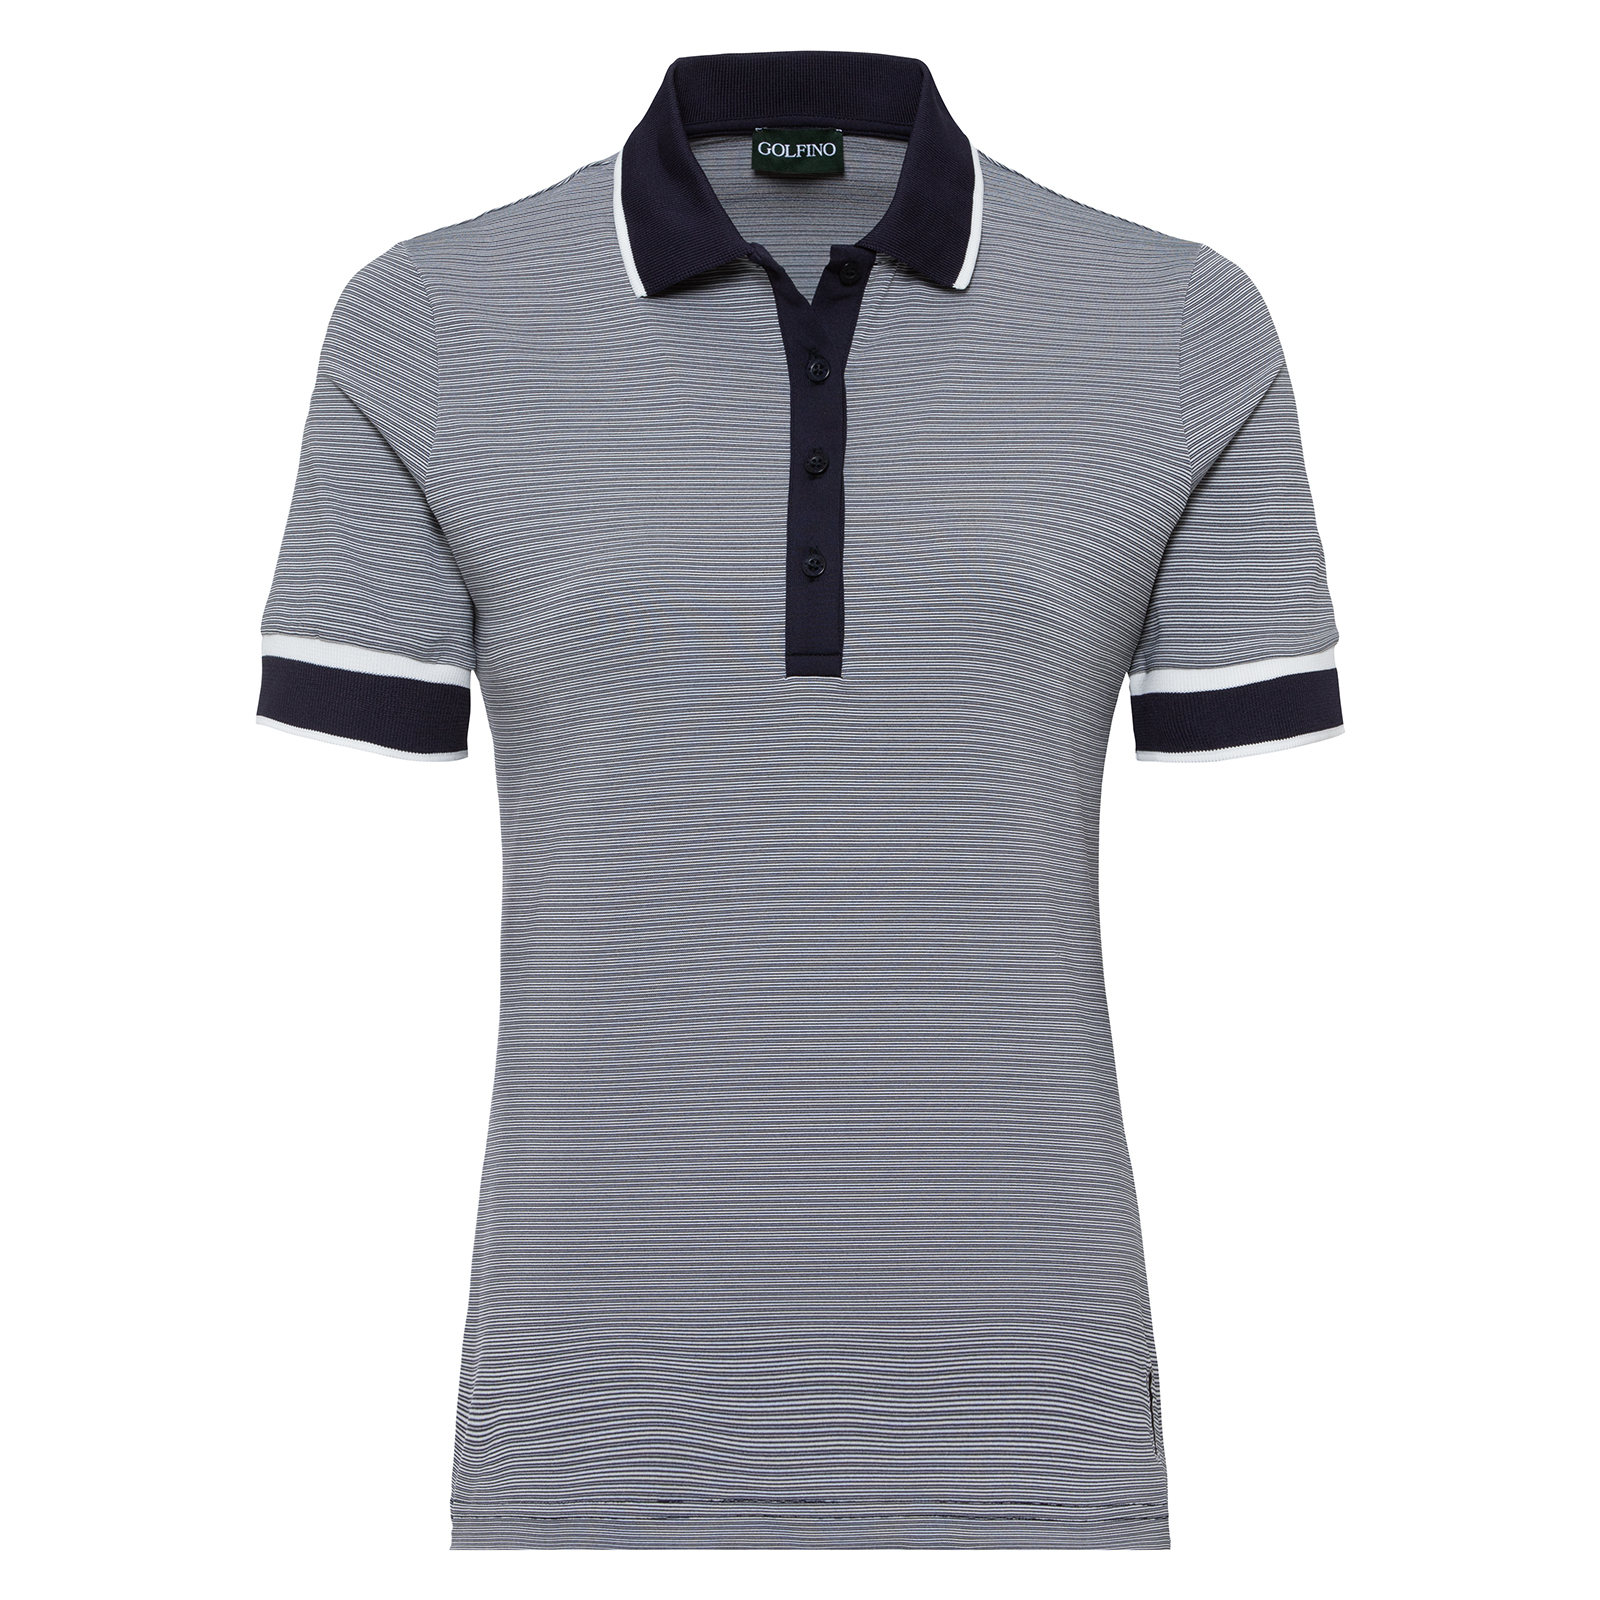 Ladies' casual short-sleeved polo shirt in stretch material